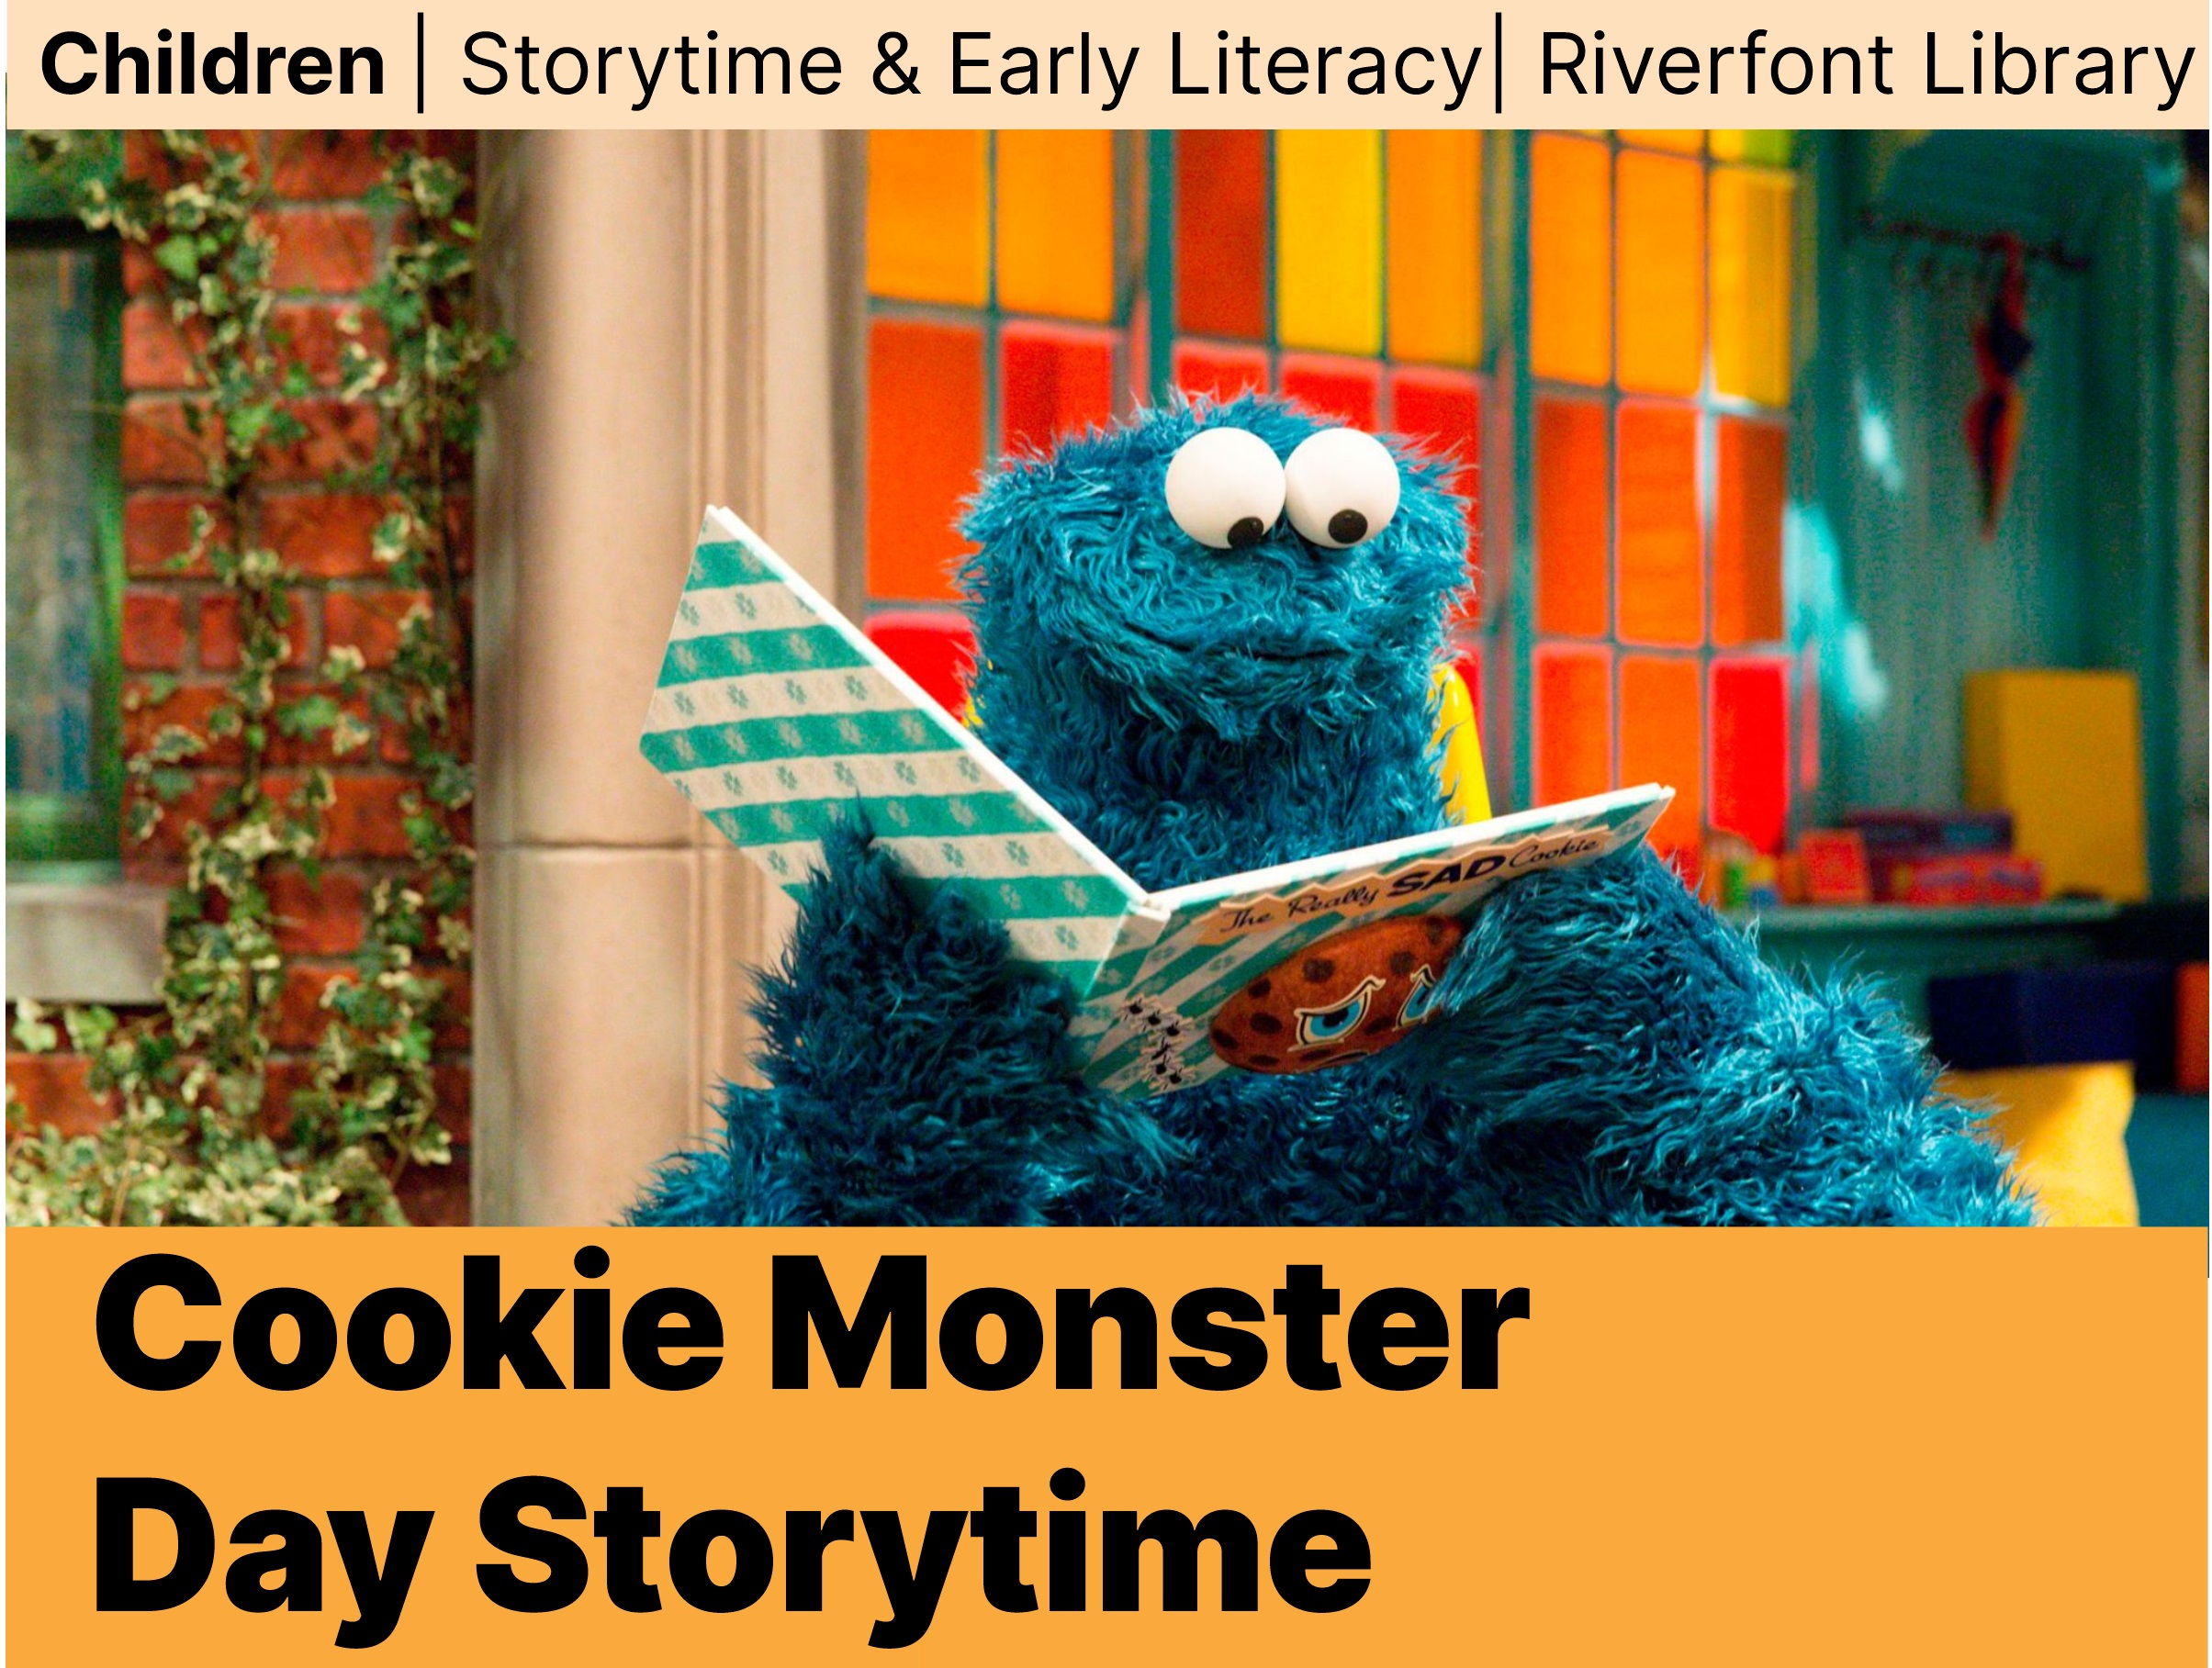 Cookie Monster reading a book